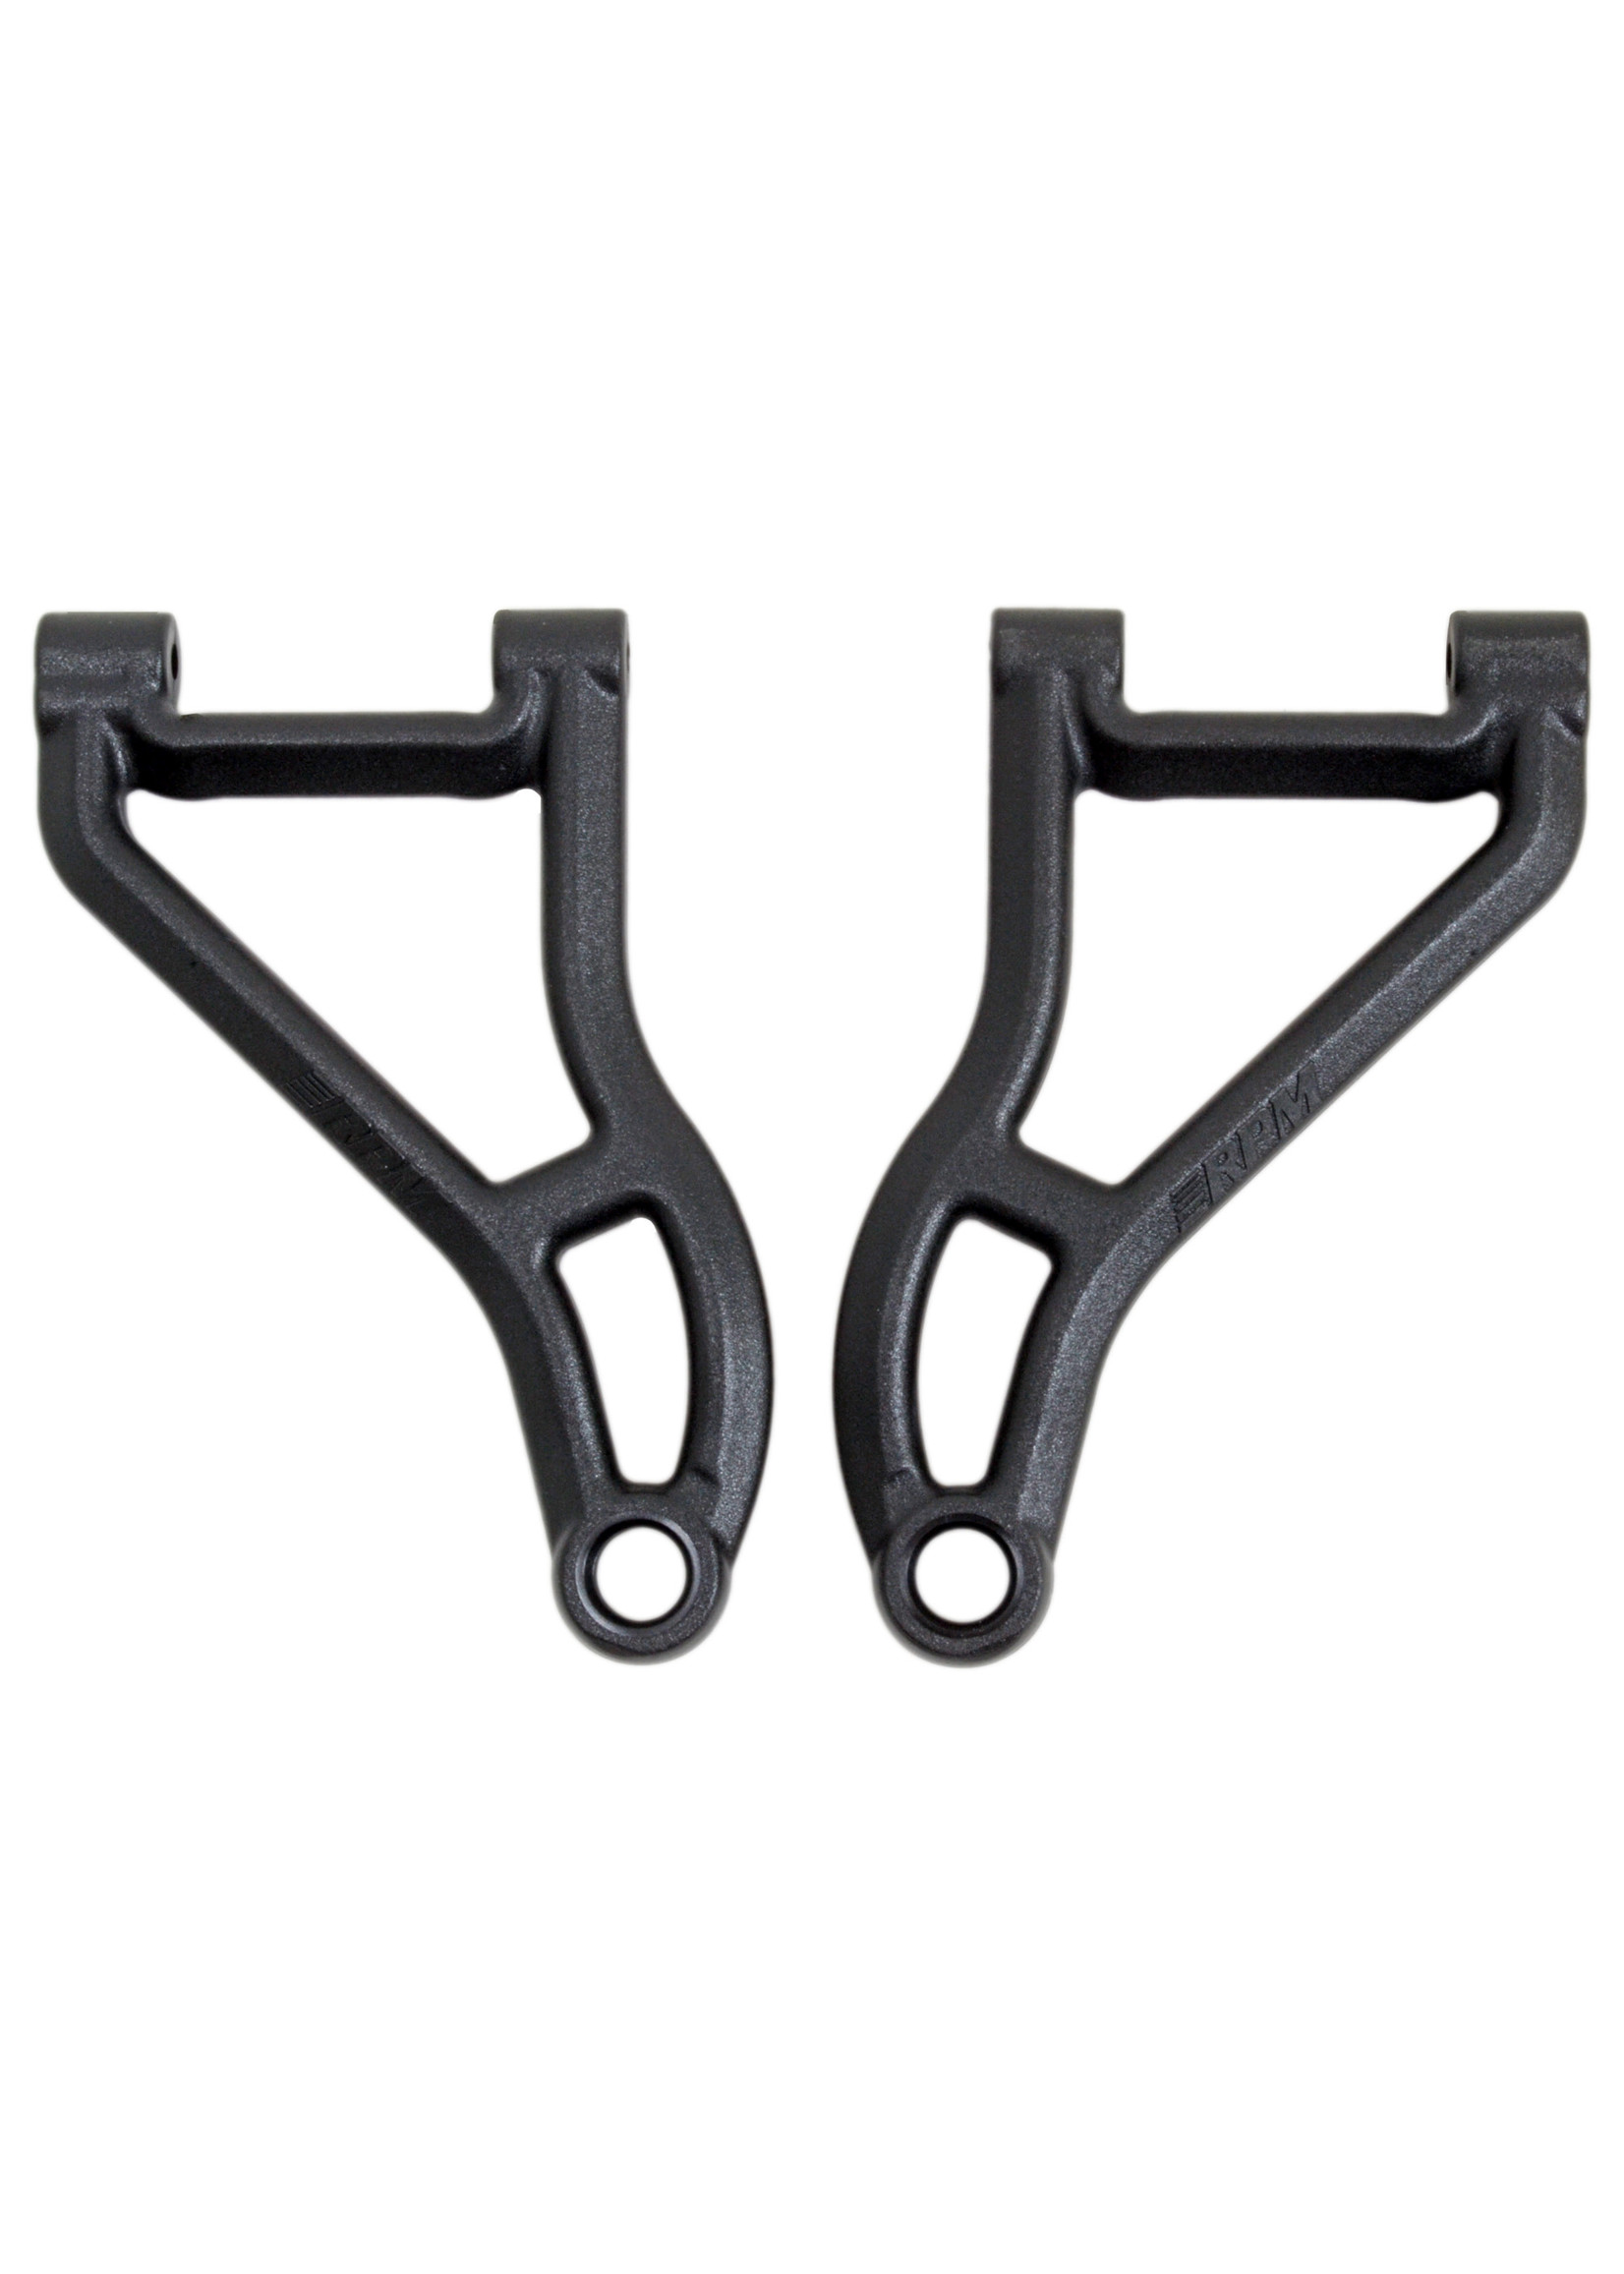 RPM RPM81382 RPM Front Upper A-Arms for the Traxxas Unlimited Desert Racer, Replaces TRA8531